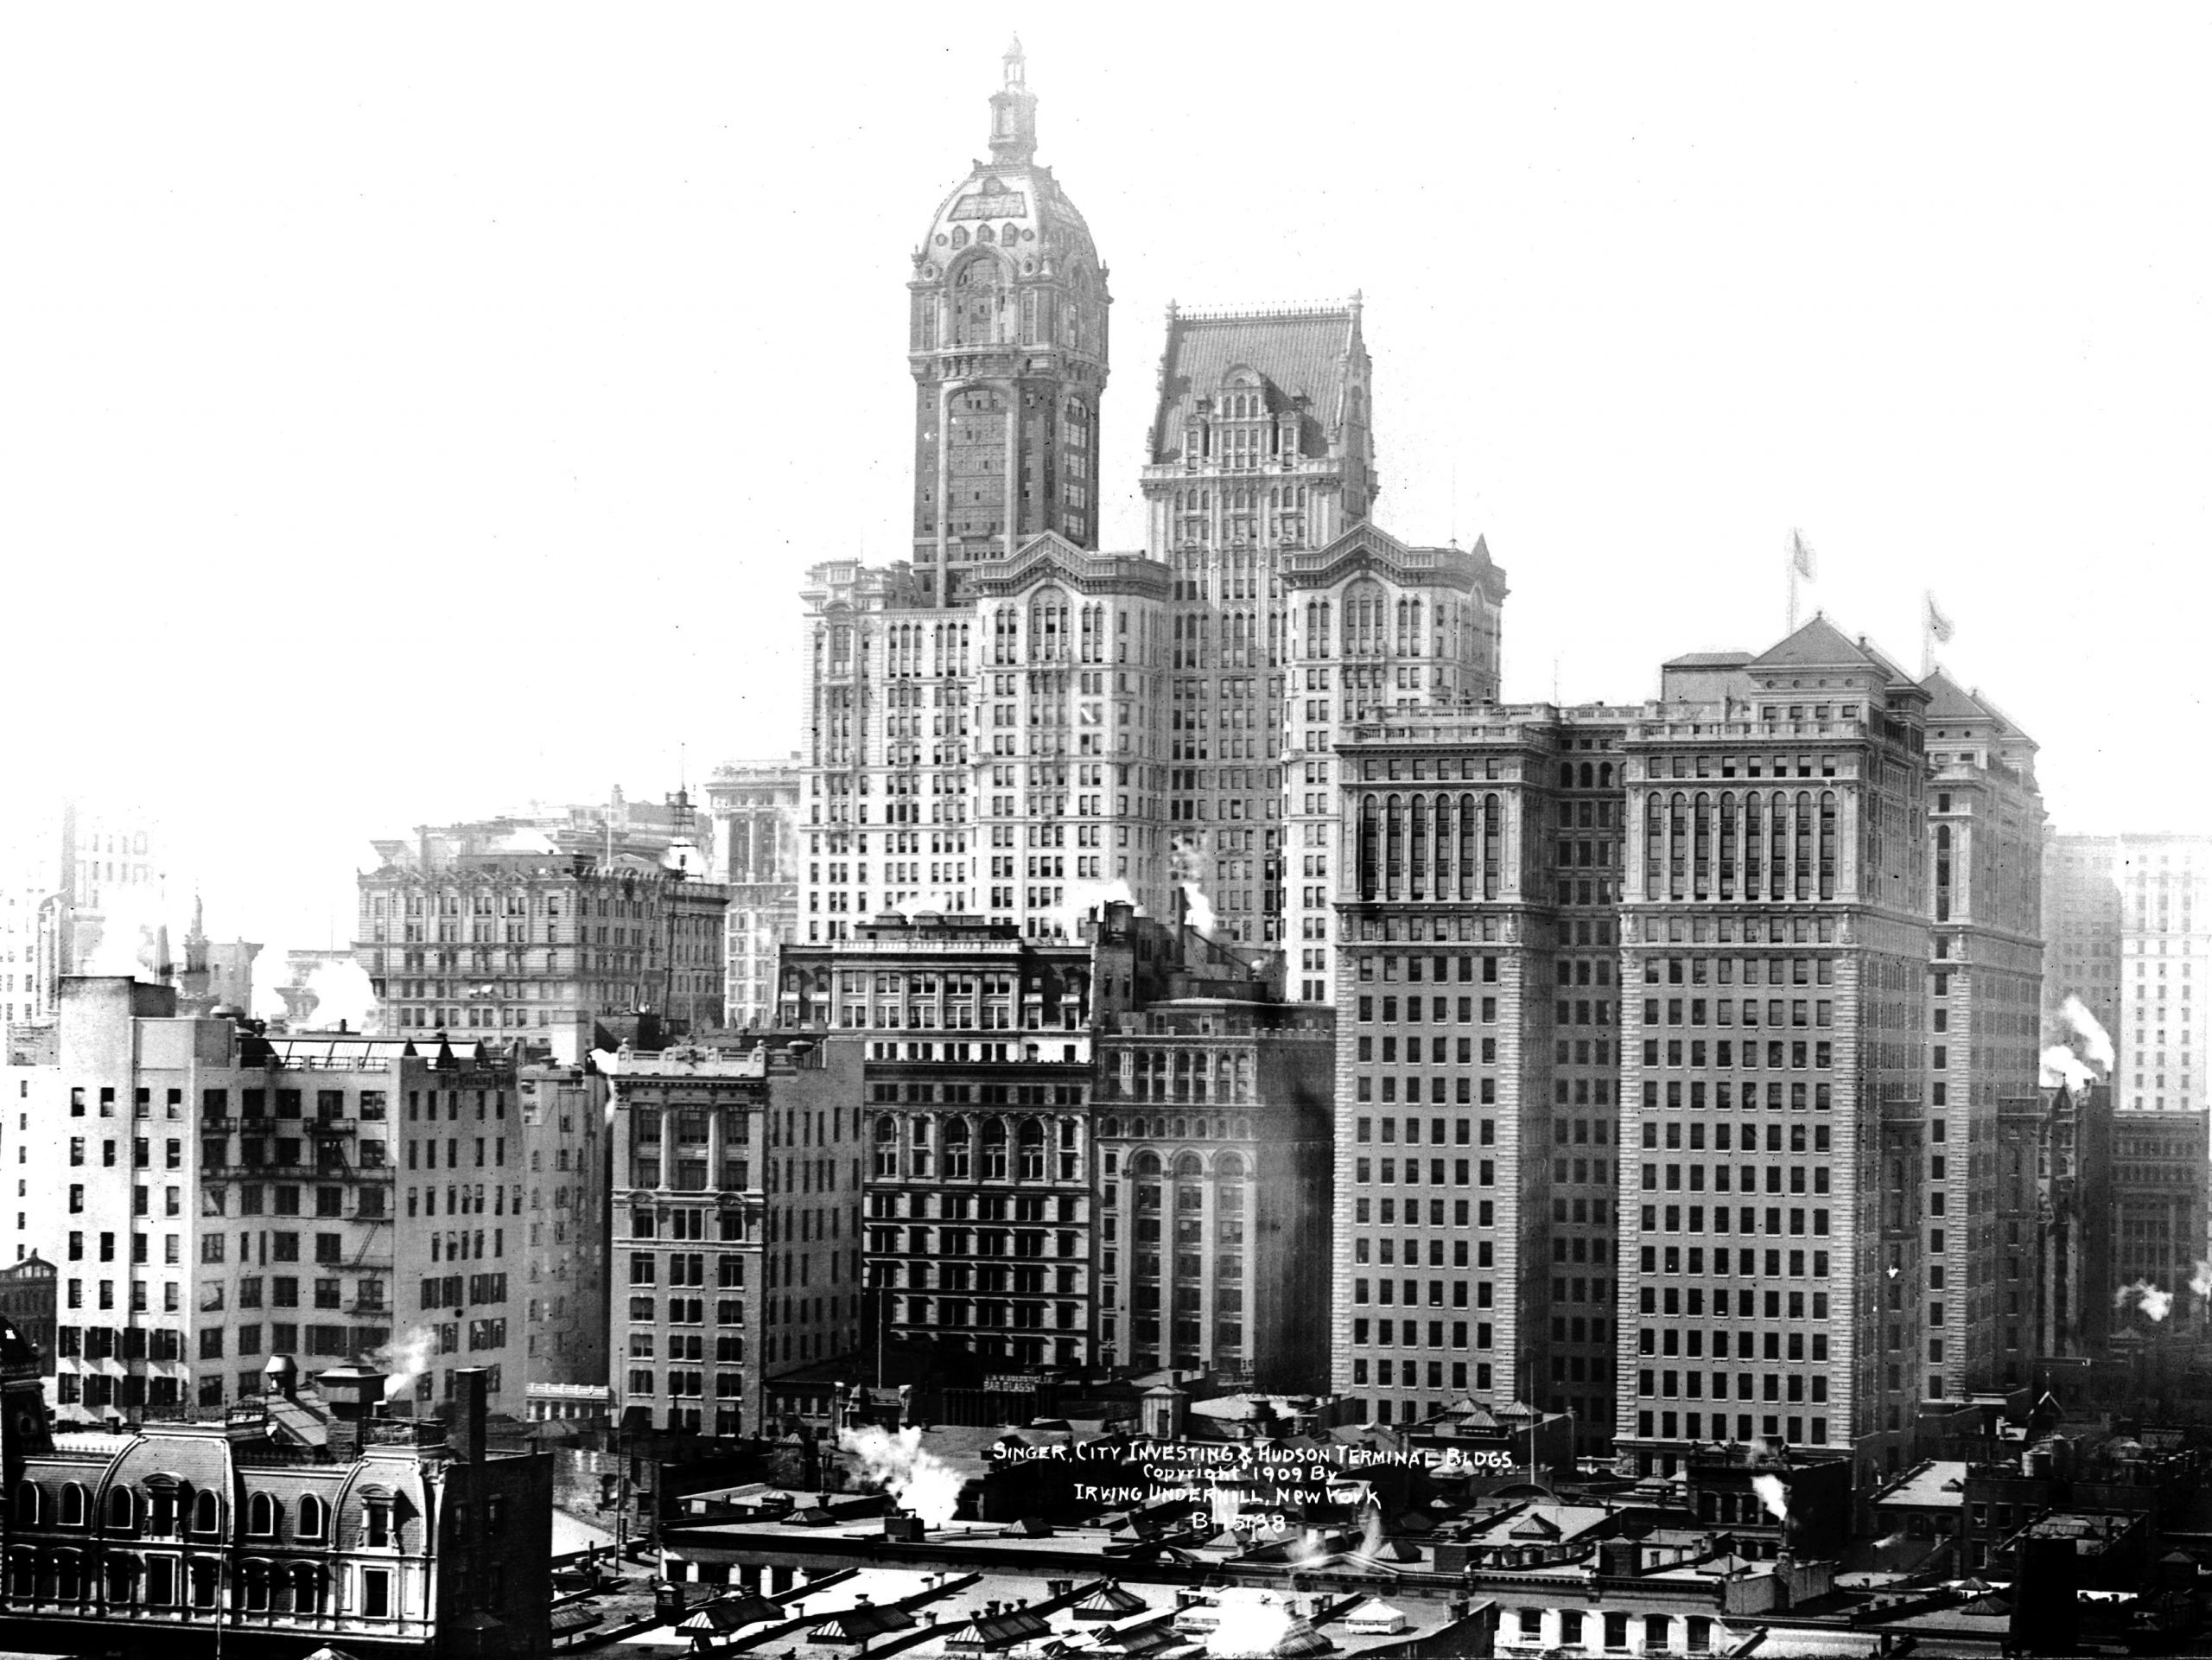 Singer Building with the Hudson Terminal in 1909